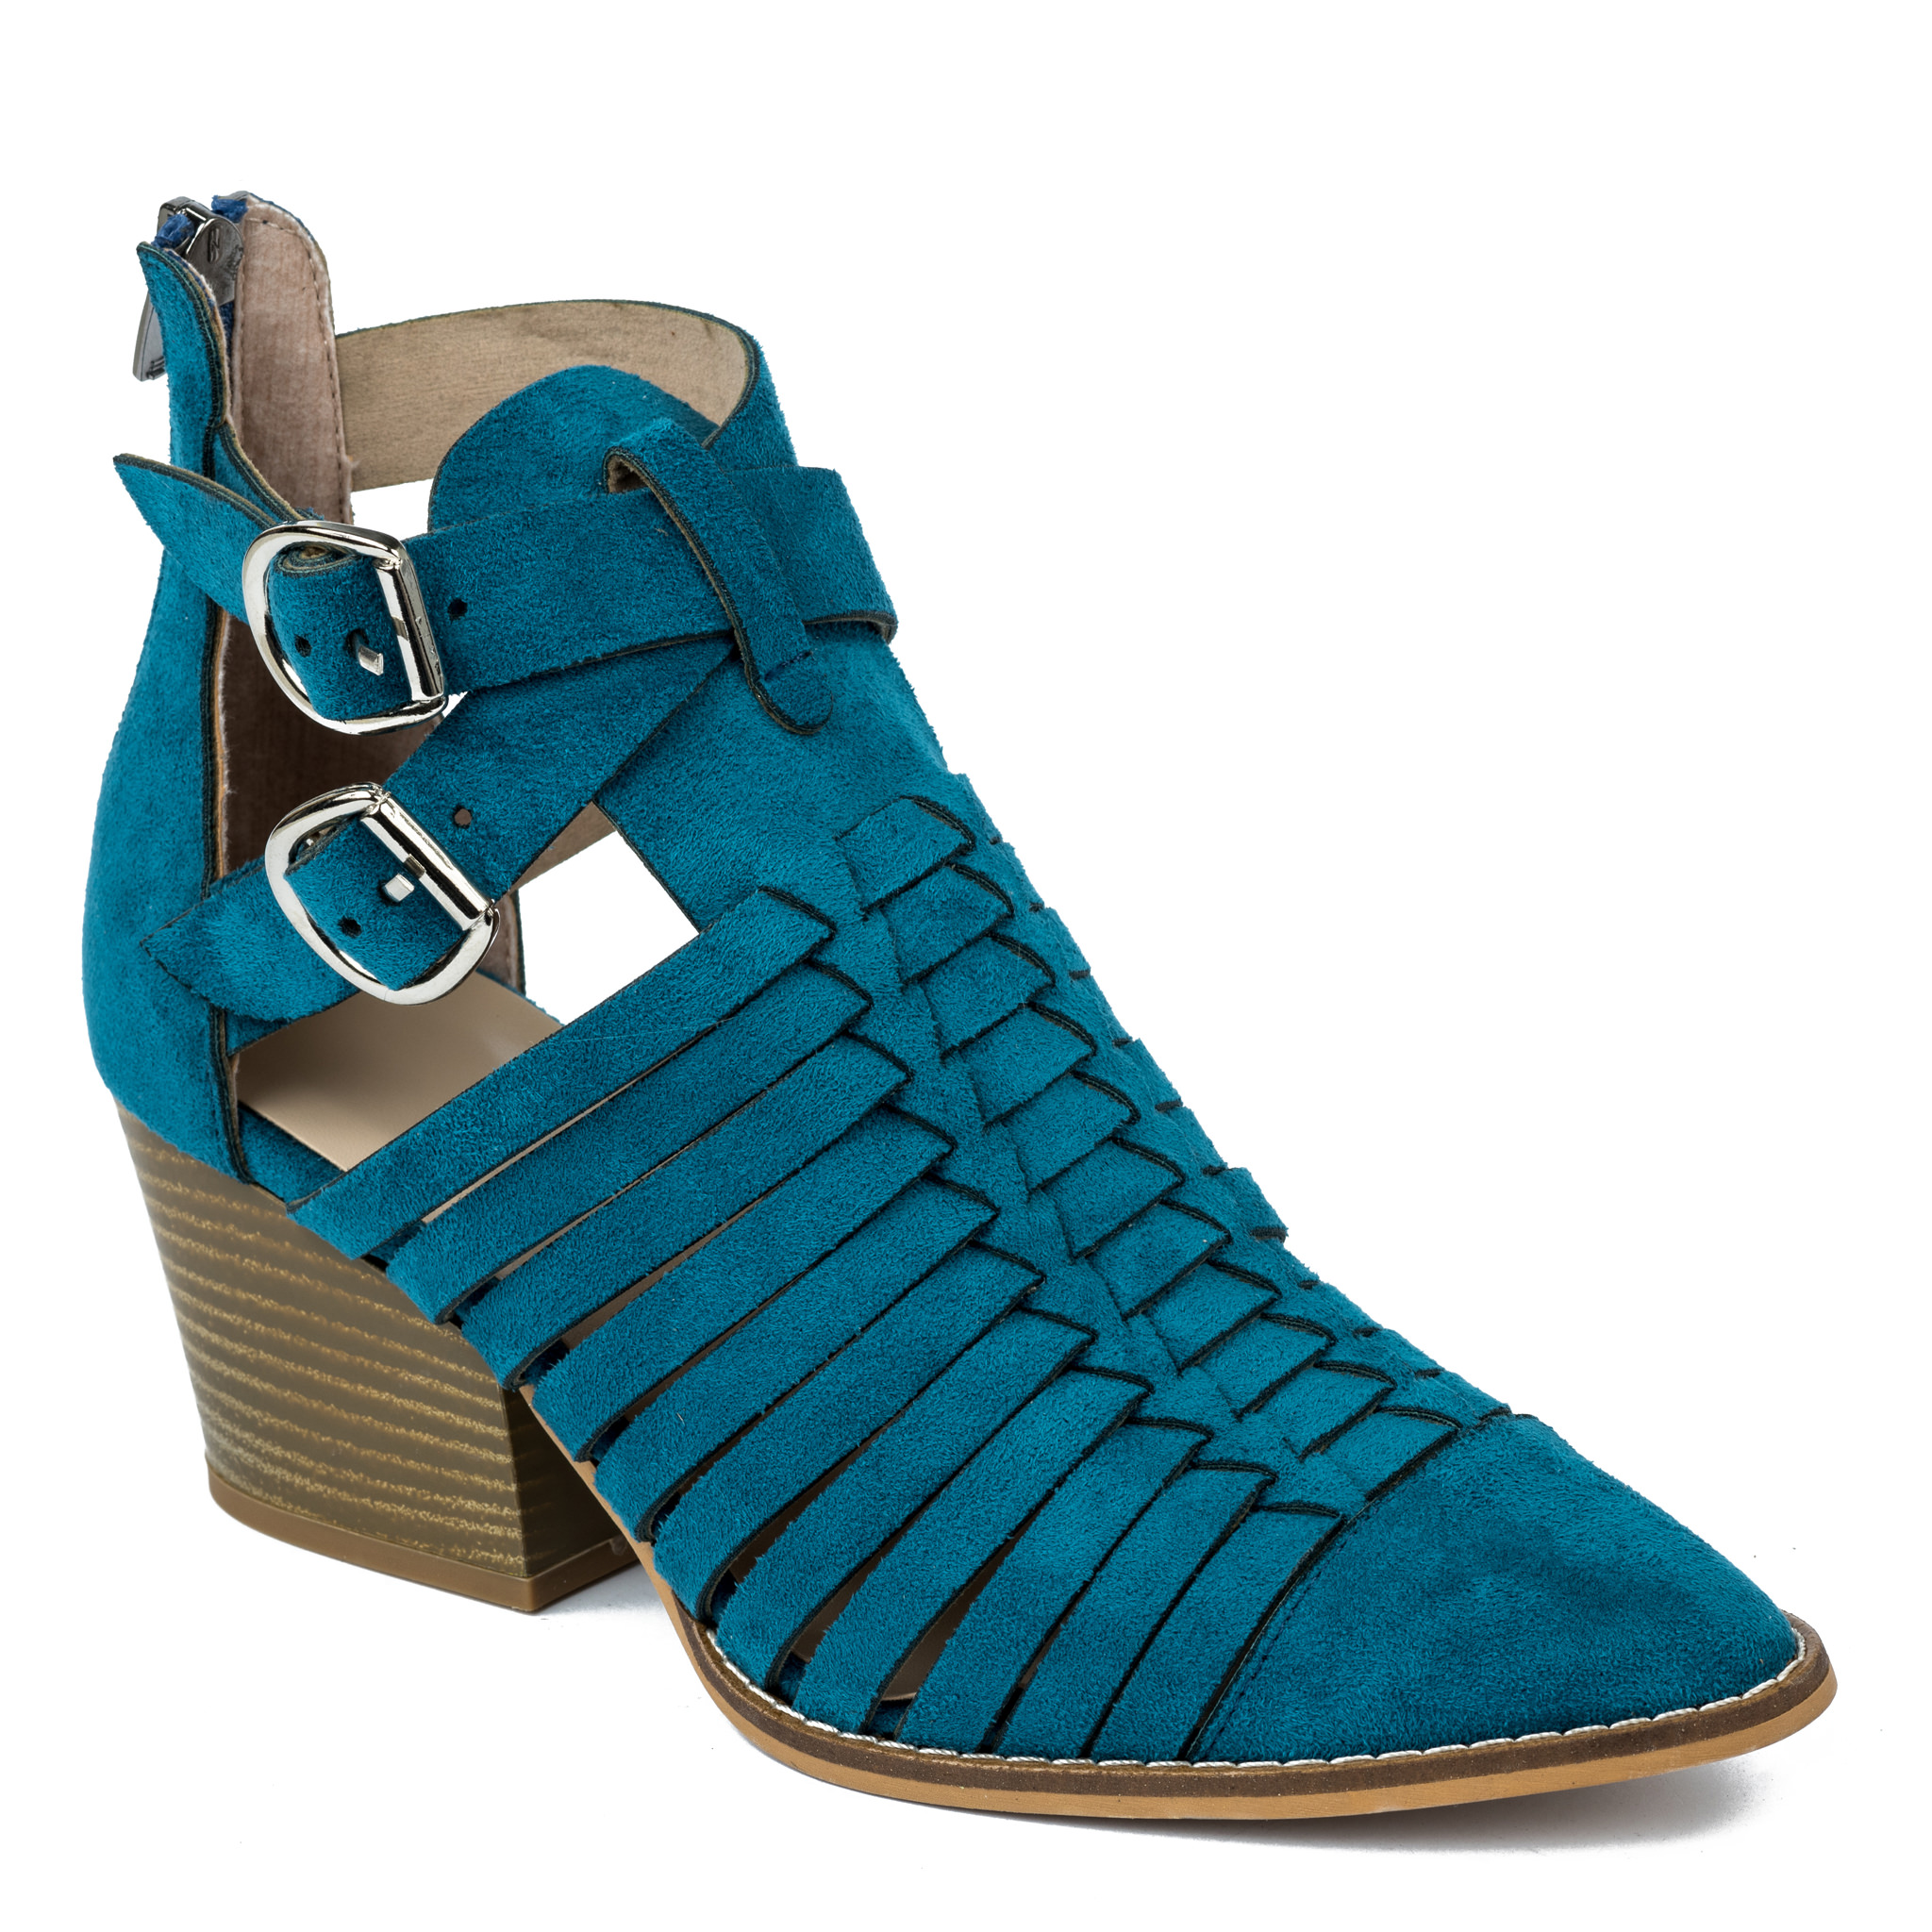 VELOUR ANKLE BOOTS WITH BLOCK HEEL - BLUE